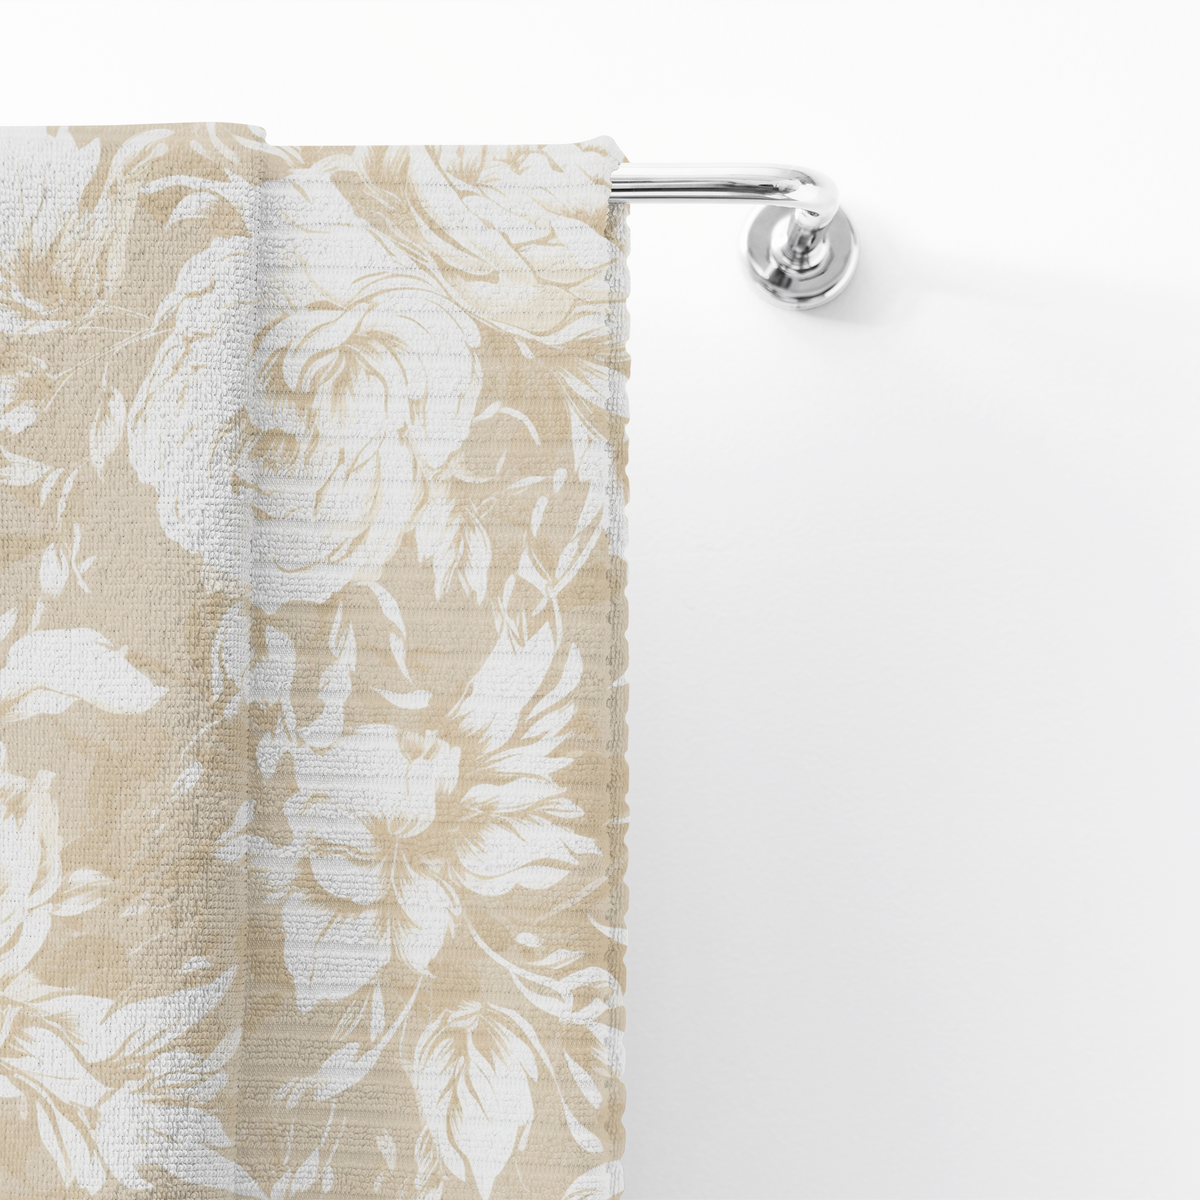 Floral Oasis Bath & Beach Towel | Hypoallergenic - Allergy Friendly - Naturally Free